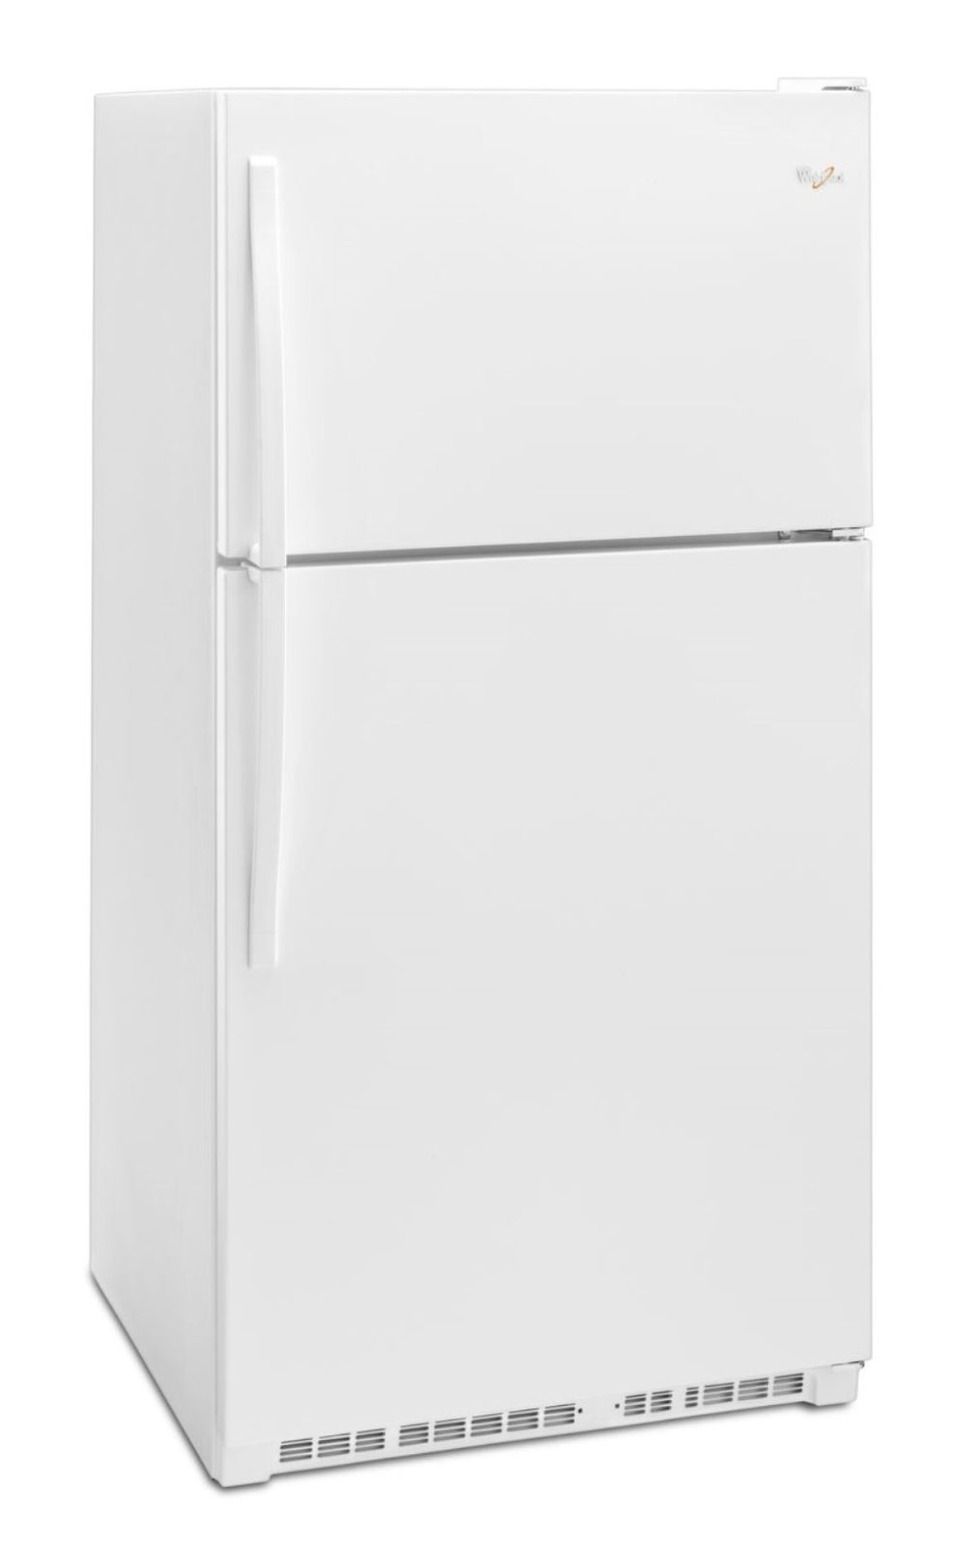  Kenmore 33 in. 20.5 cu. ft. Capacity Refrigerator/Freezer with  Full-Width Adjustable Glass Shelving, Humidity Control Crispers, ENERGY  STAR Certified, Fingerprint Resistant Stainless Steel : Everything Else